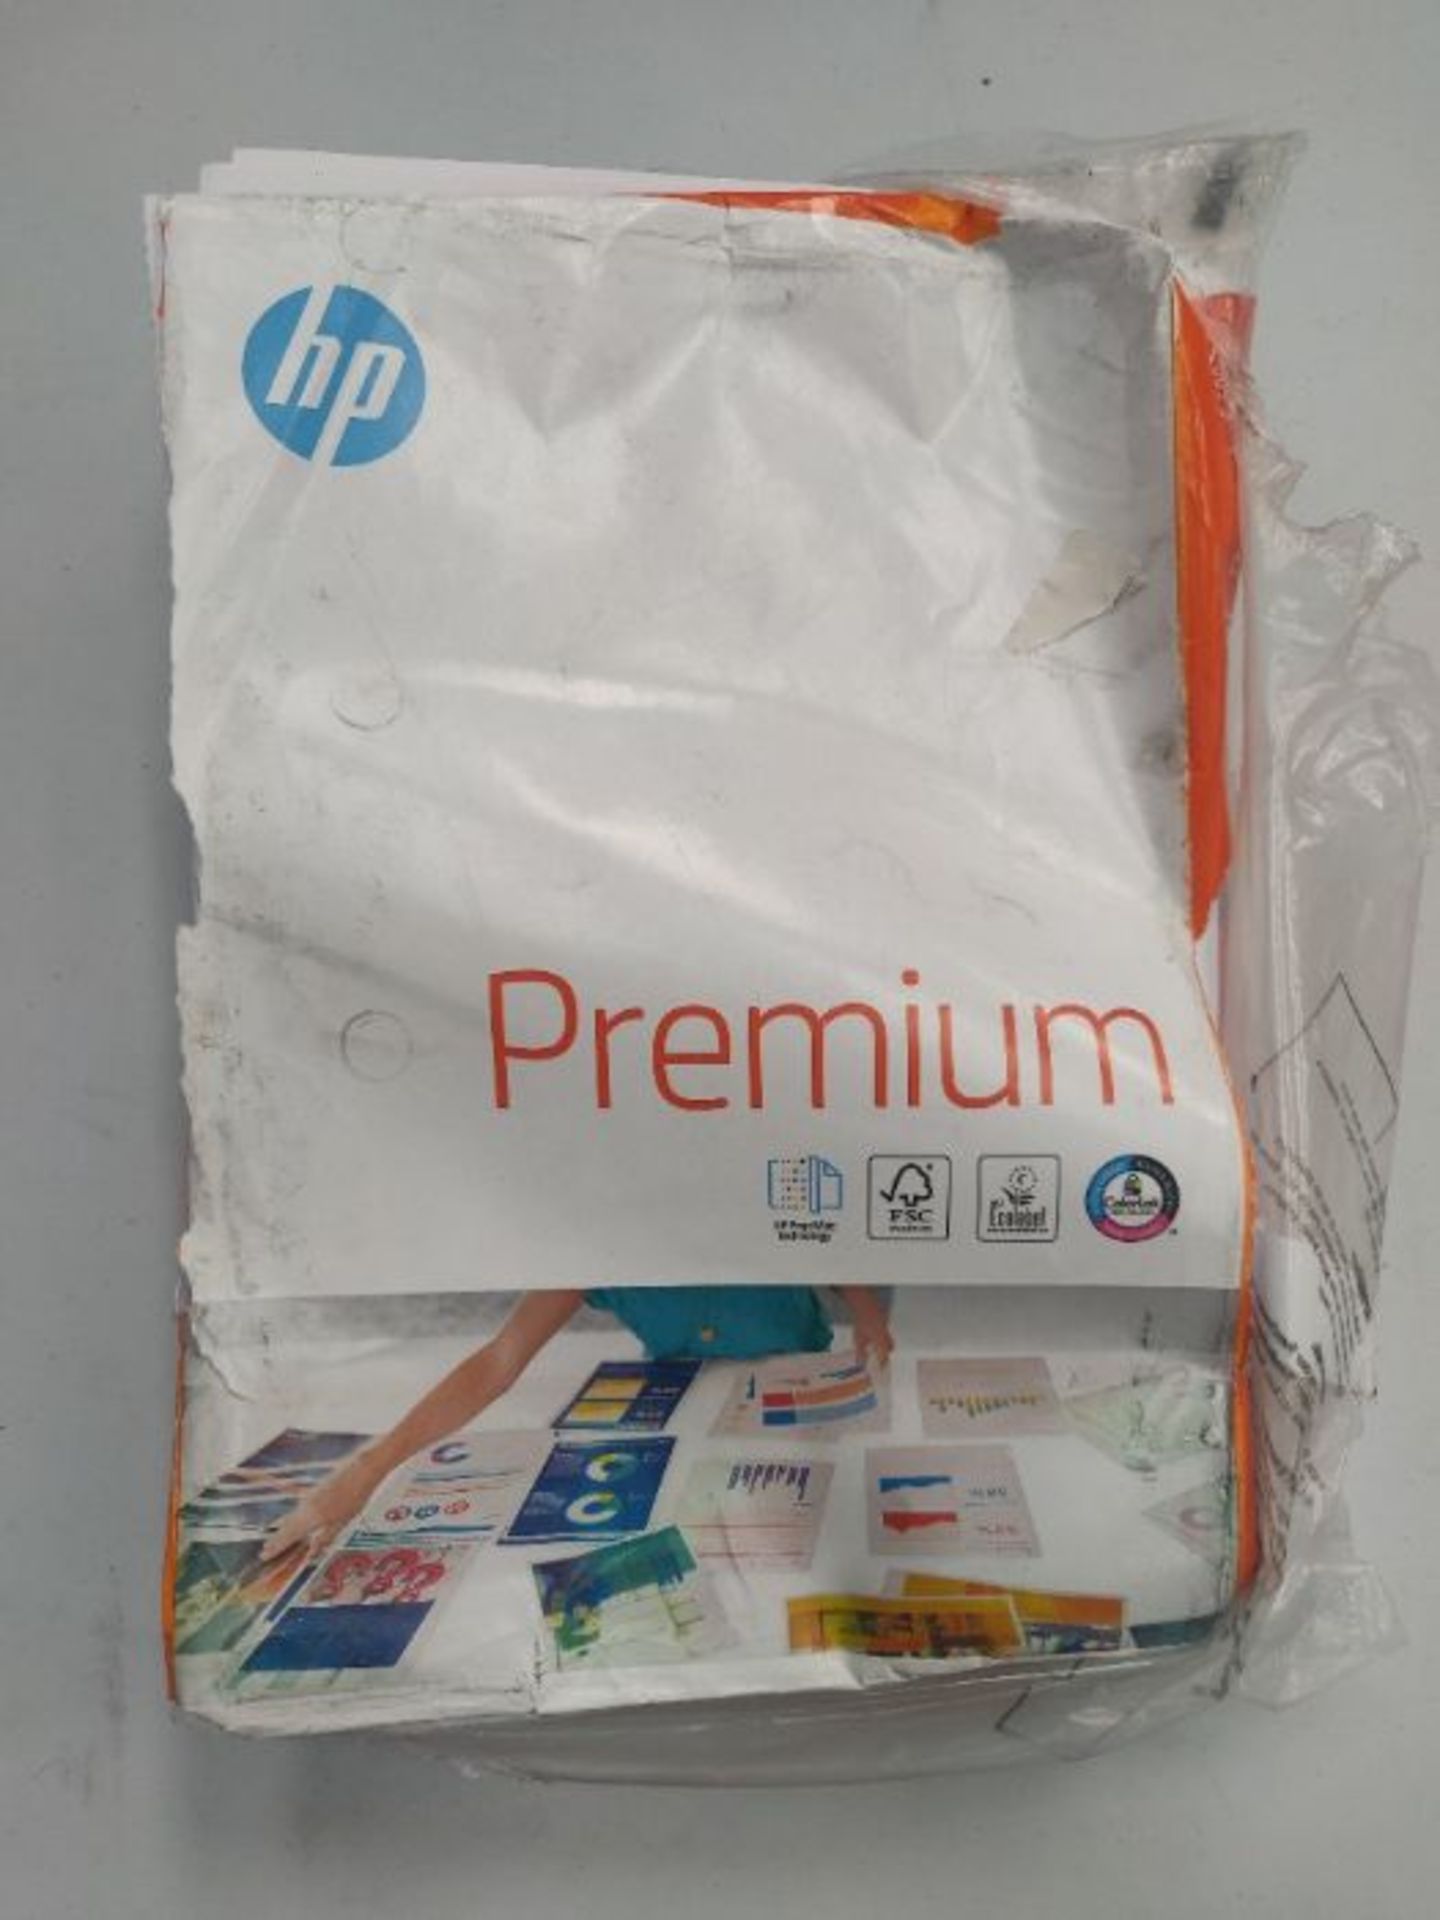 HP Papers CHP852 A4 90 gsm FSC Premium Paper, White - Image 2 of 2